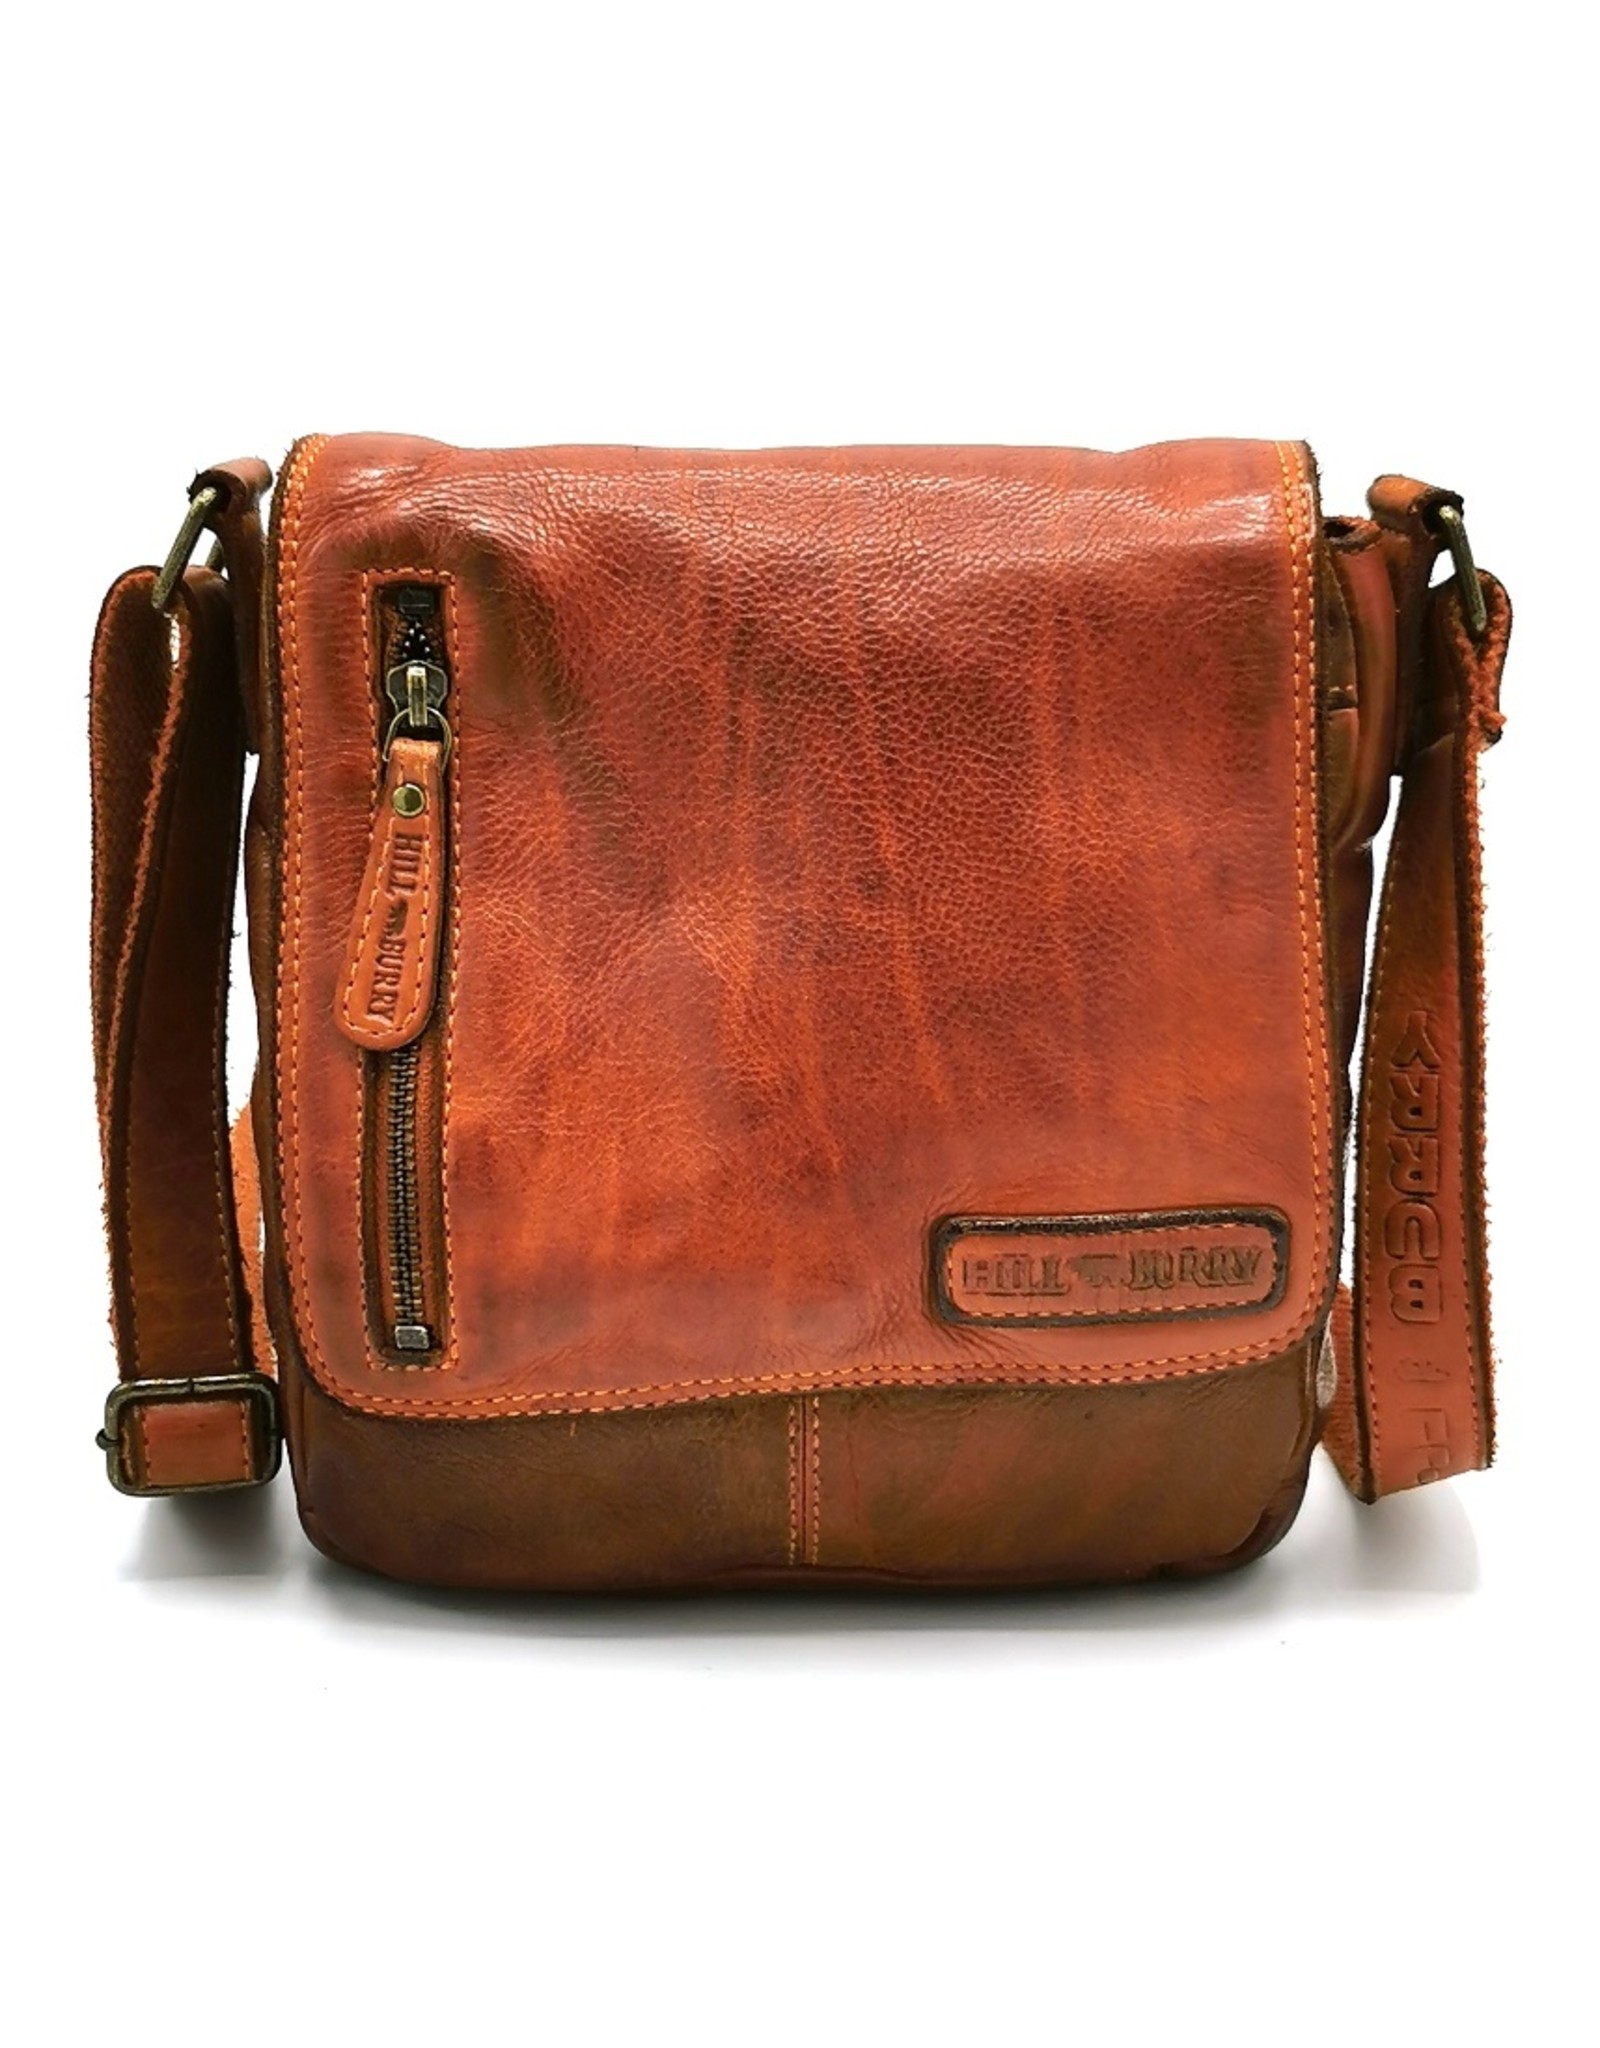 HillBurry Leather bags - HillBurry Shoulder Bag with Cover Washed leather orange